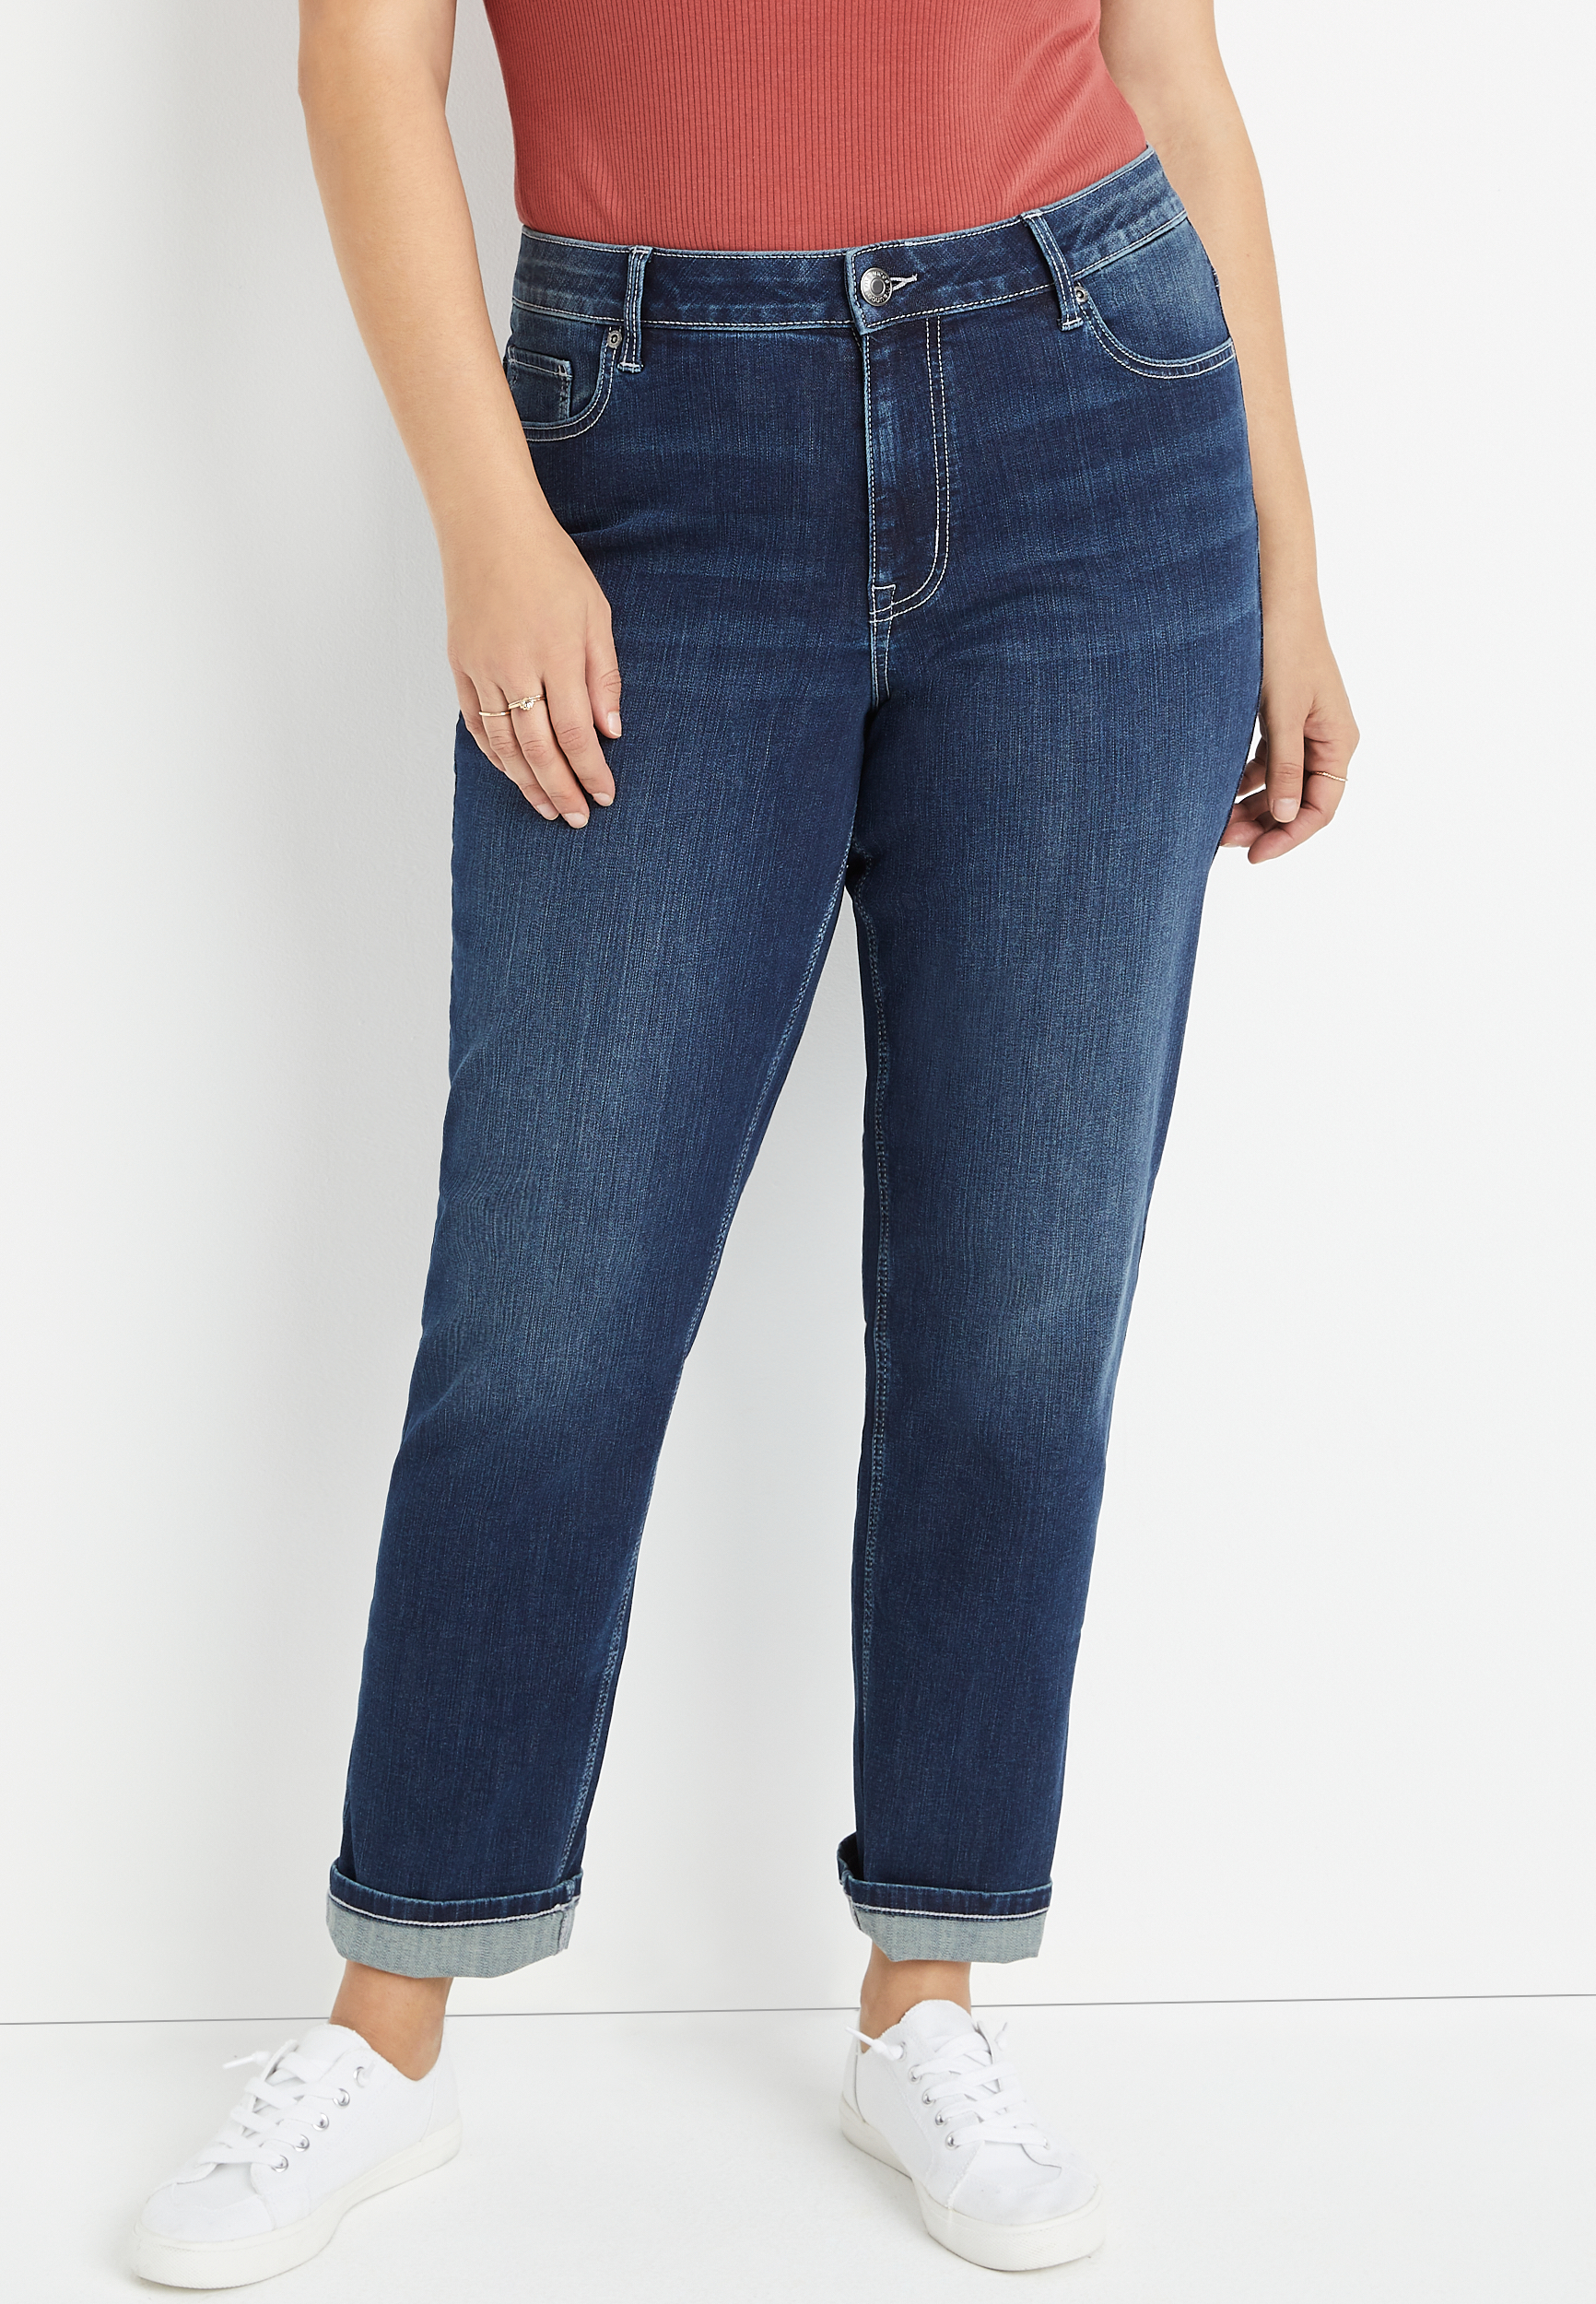 Portal Bygger Rusland Plus Size m jeans by maurices™ Classic Straight Curvy High Rise Jean |  maurices